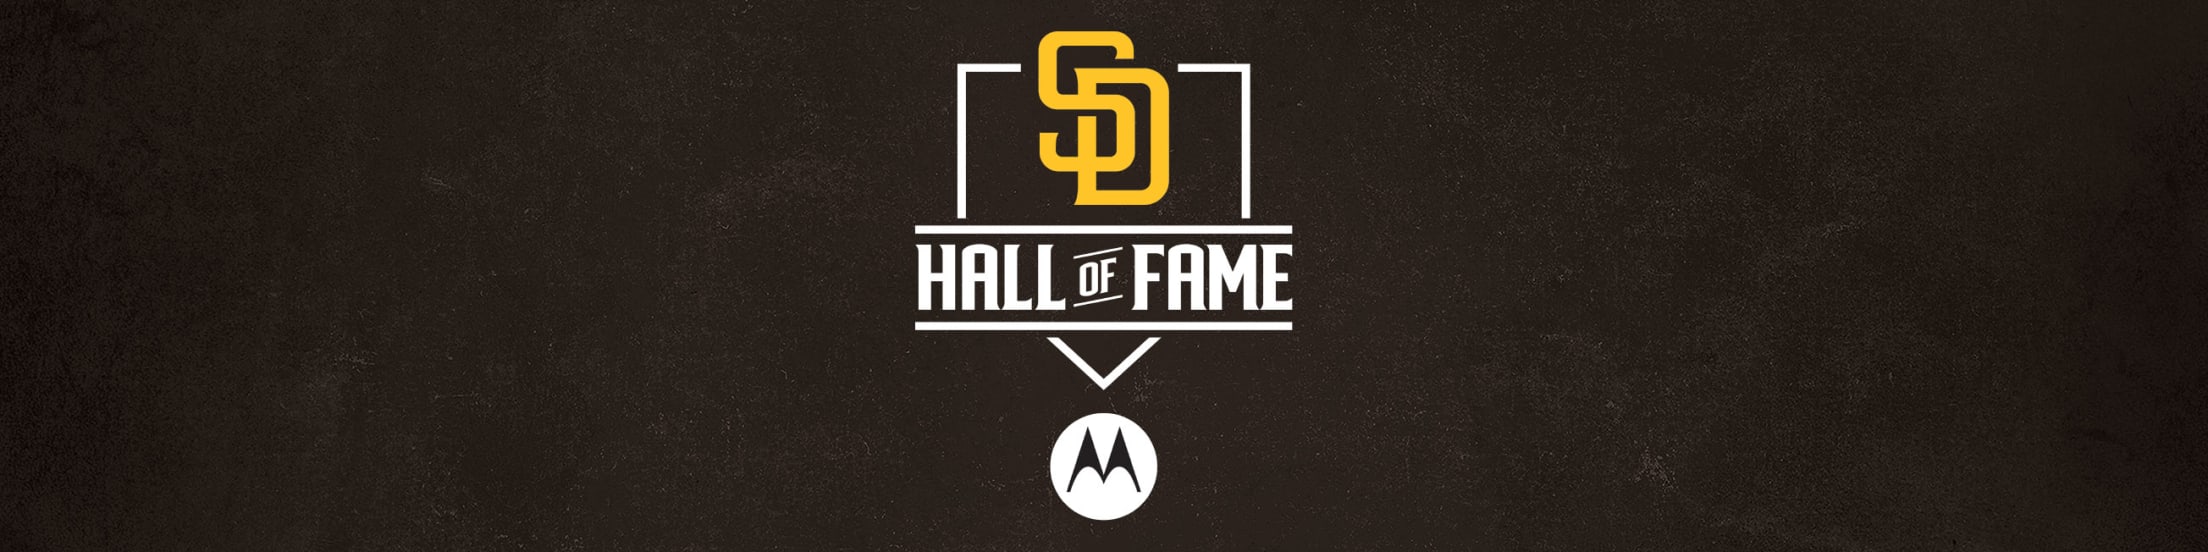 Ted Williams, Ken Caminiti To Be Inducted Into Padres Hall Of Fame